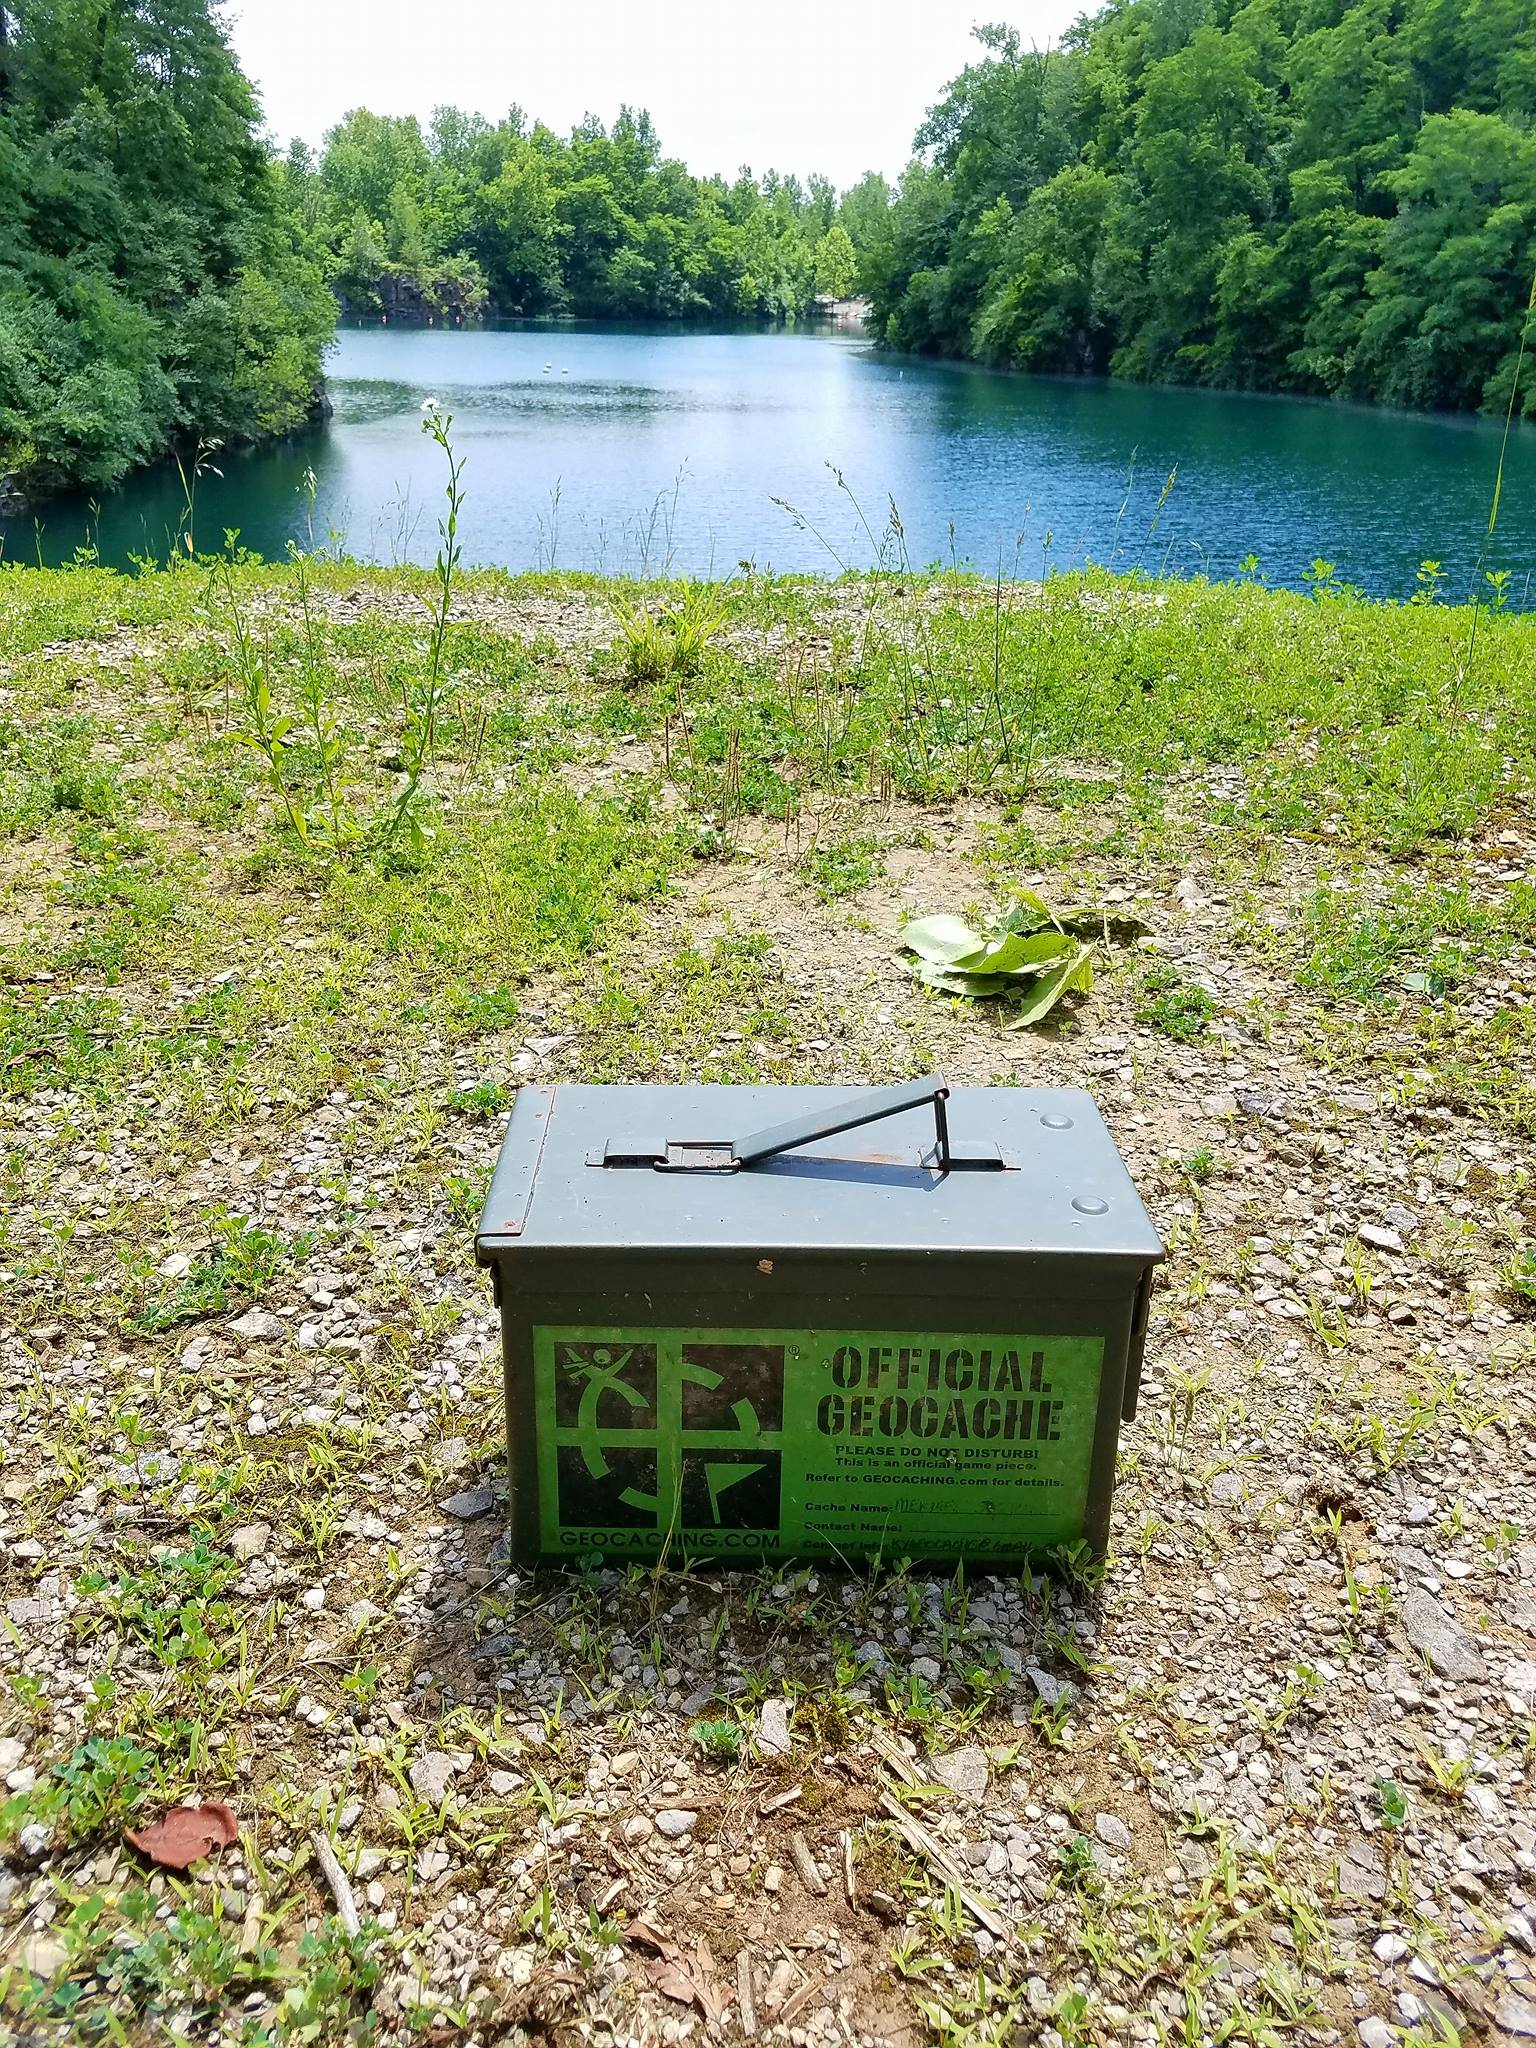 Want Free Geocache Containers? - West and Southwest - Geocaching